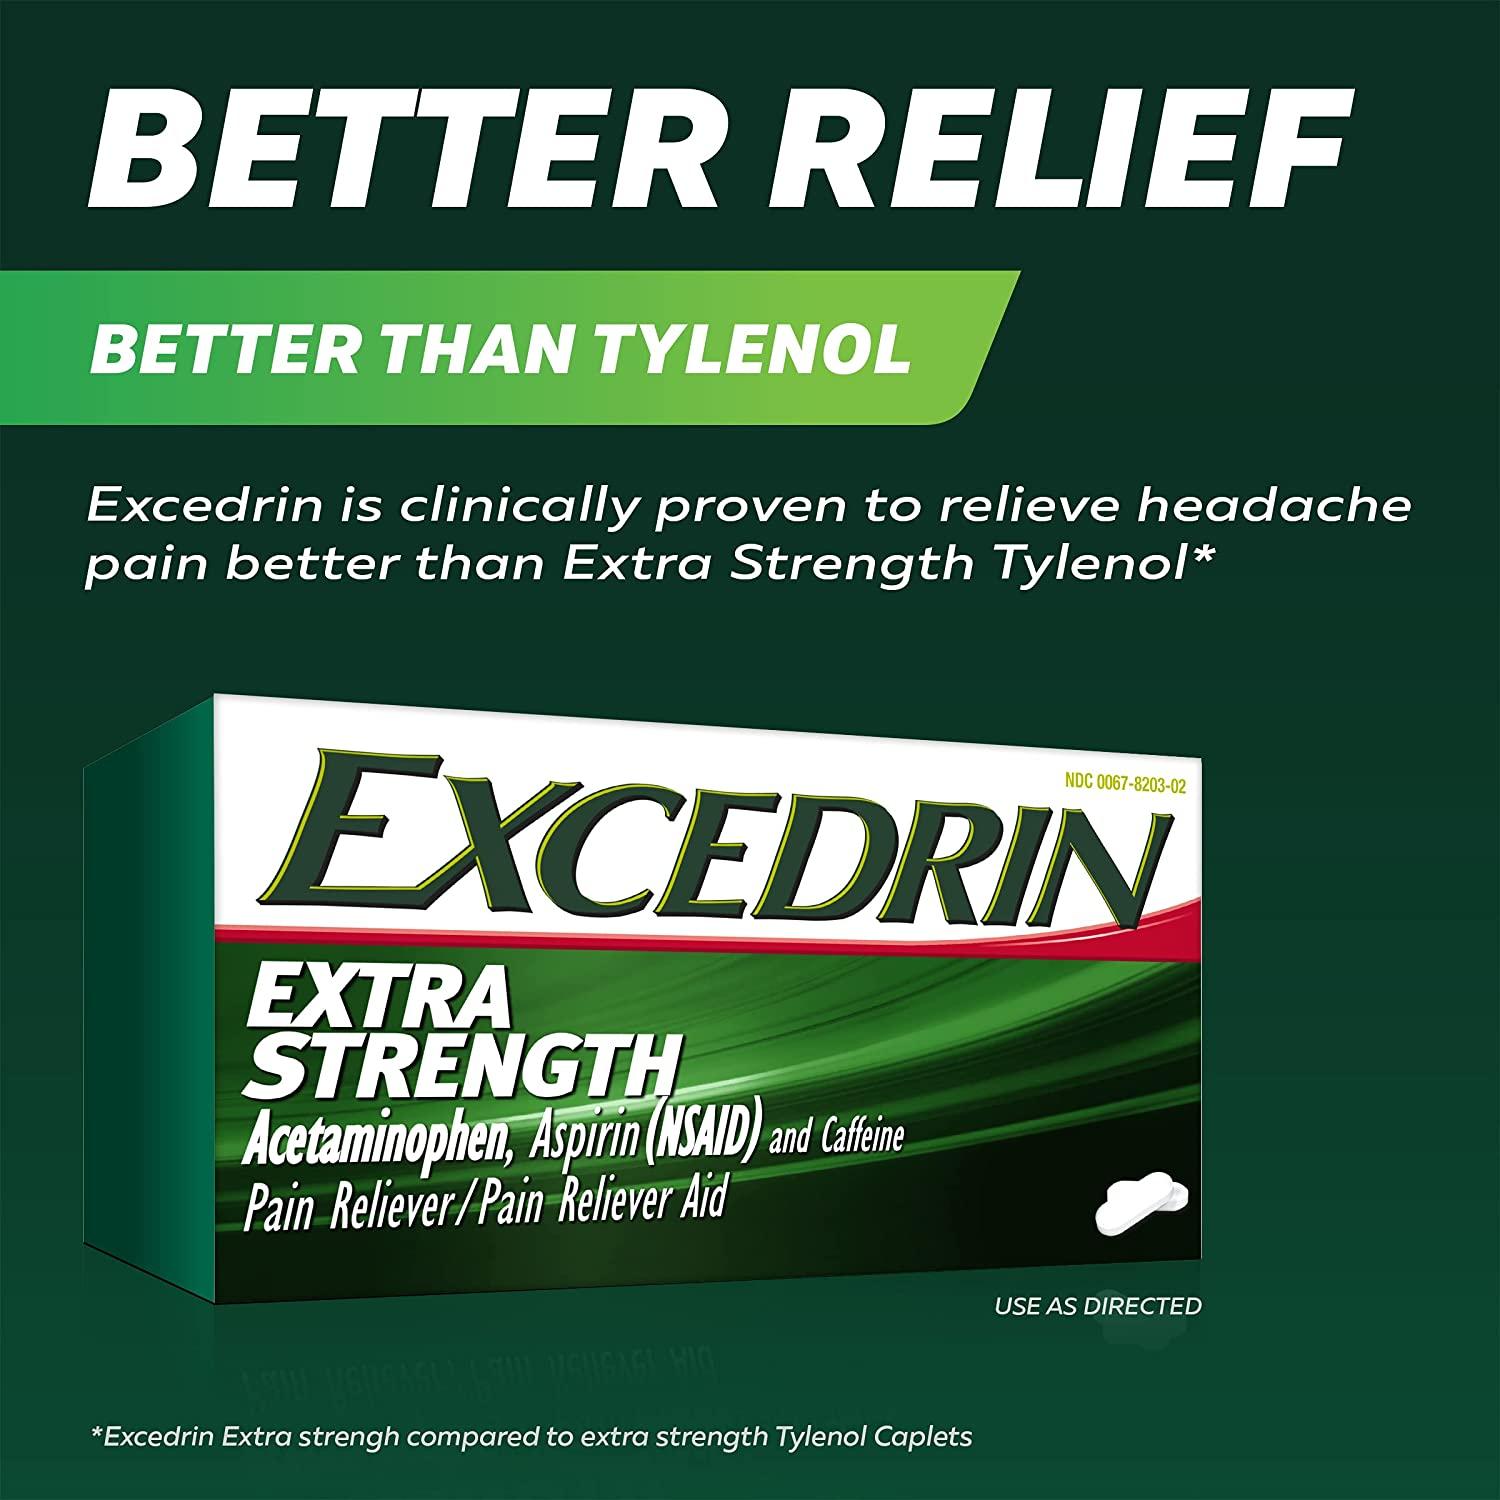 Excedrin Extra Strength Pain Reliever, Caplets - 200 count